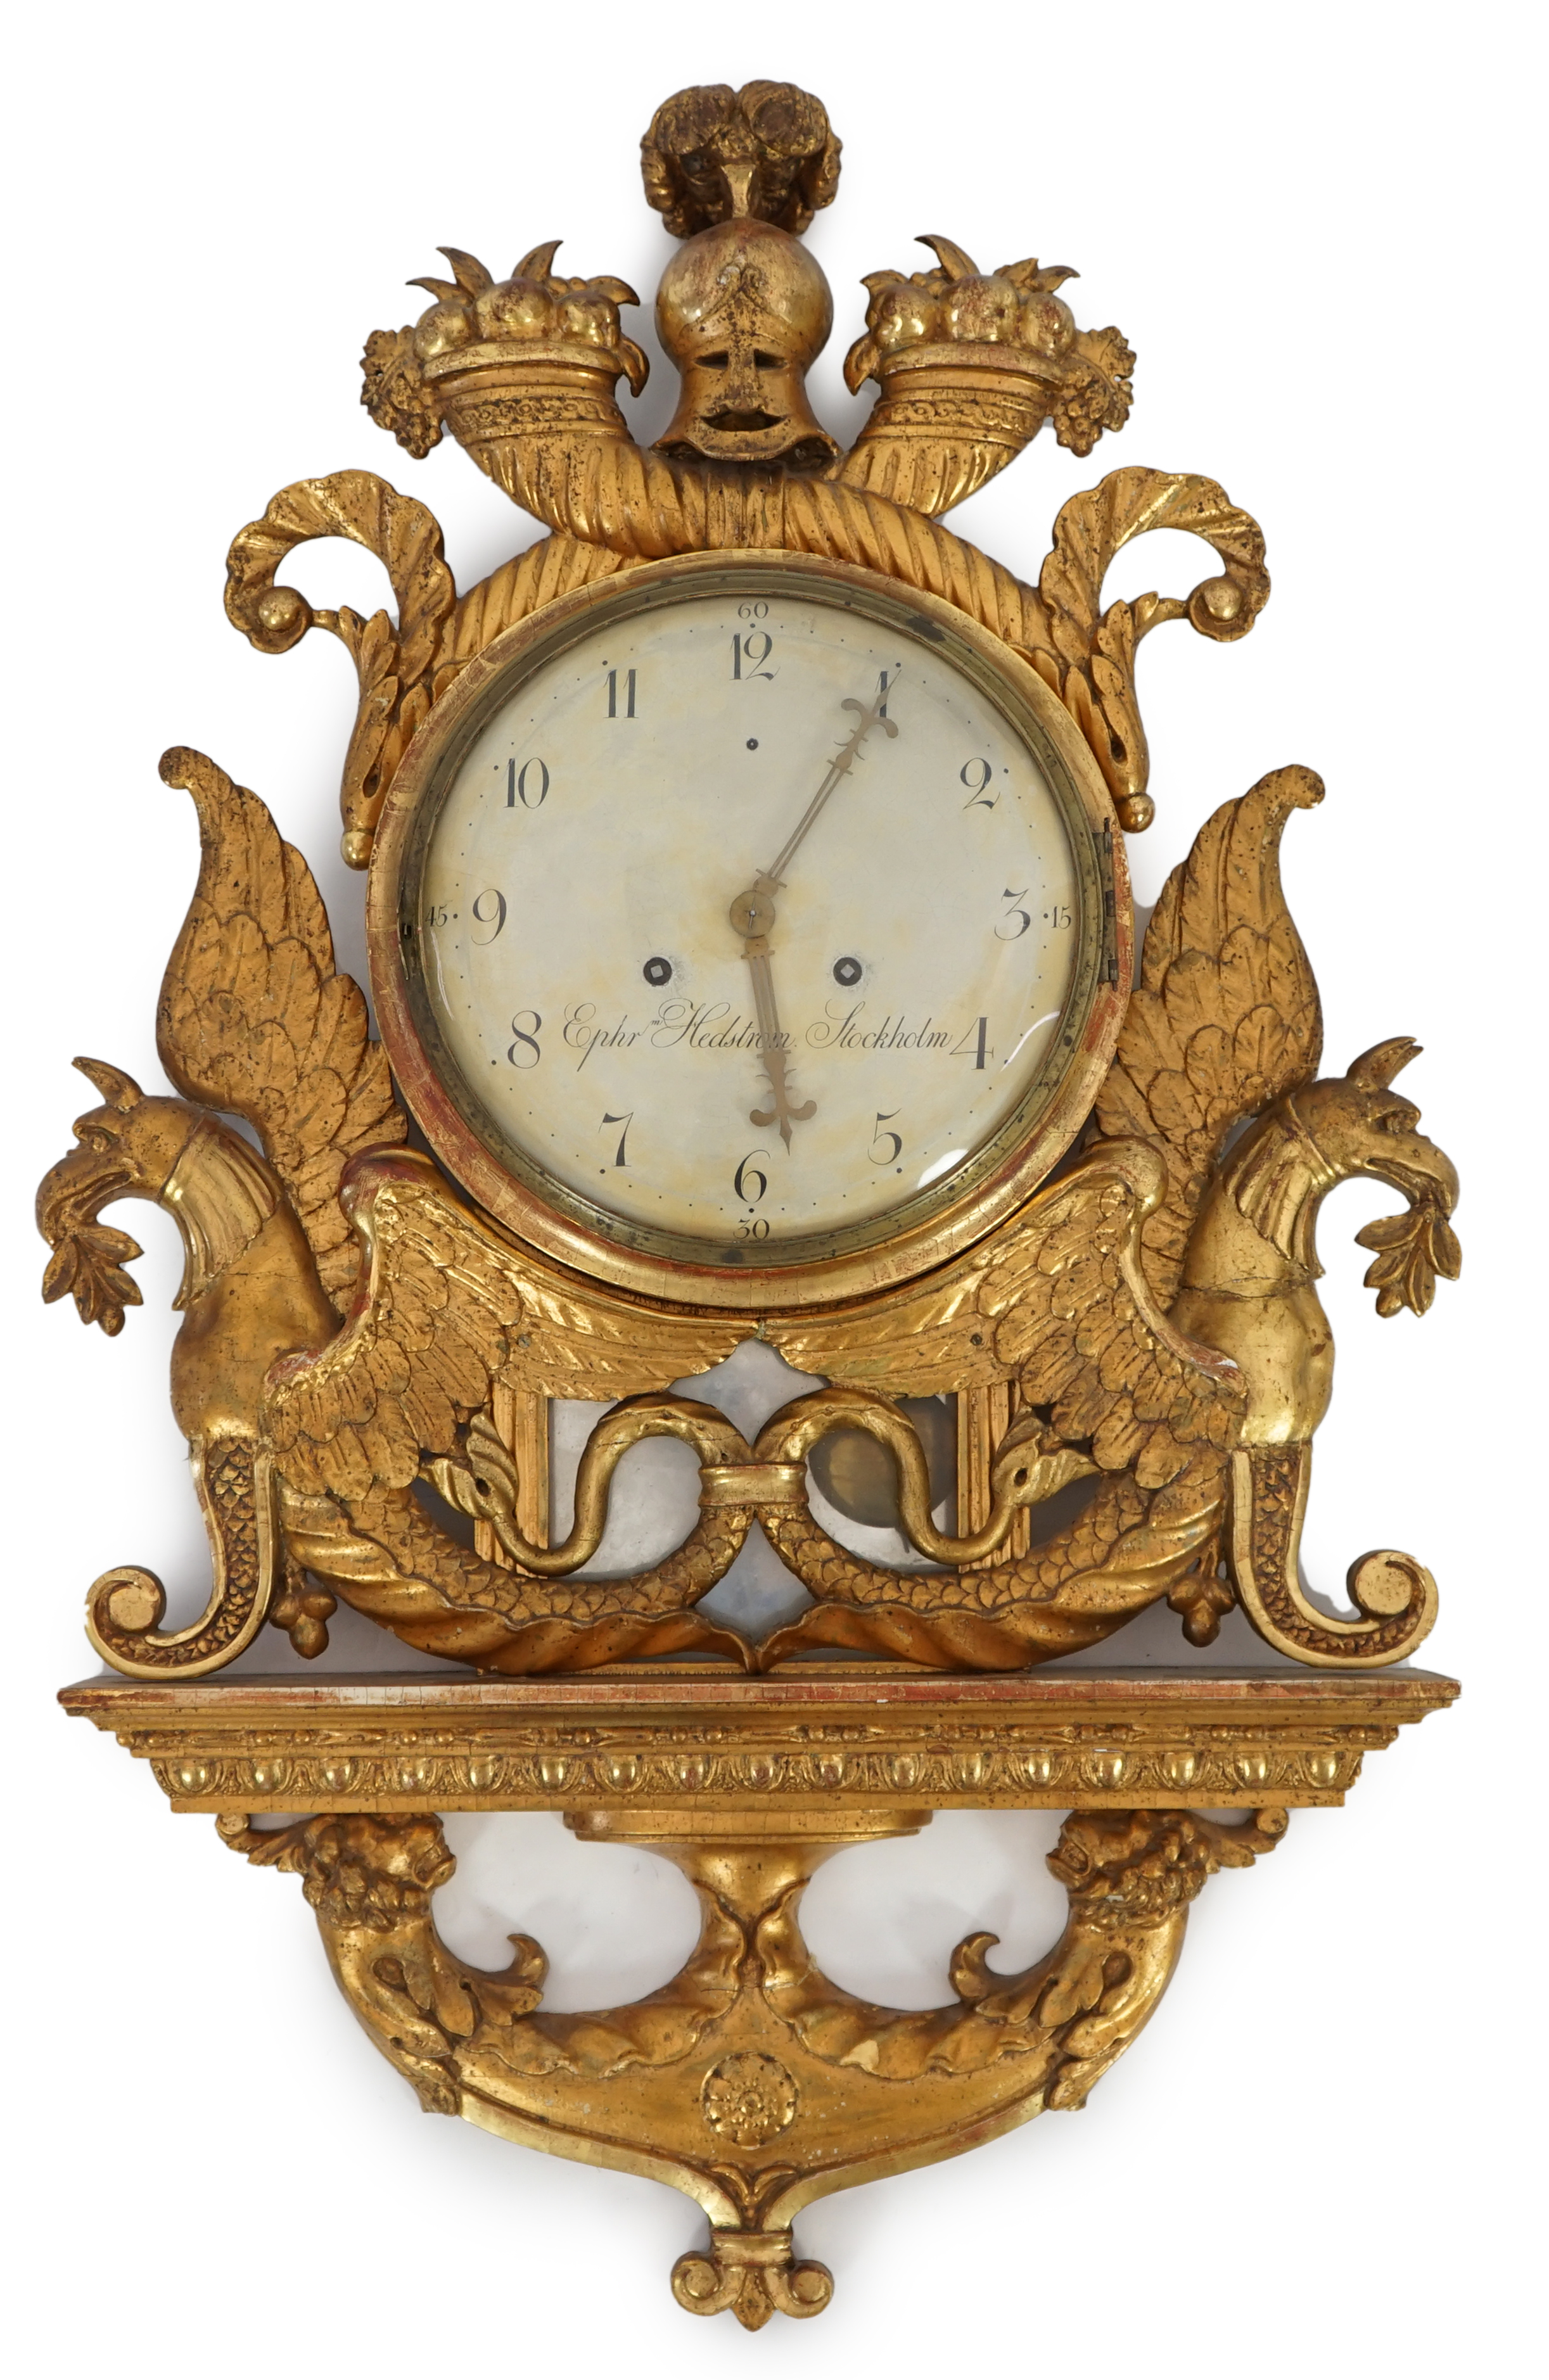 Ephr. Hedstrom of Stockholm, an early 19th century Swedish giltwood cartel clock